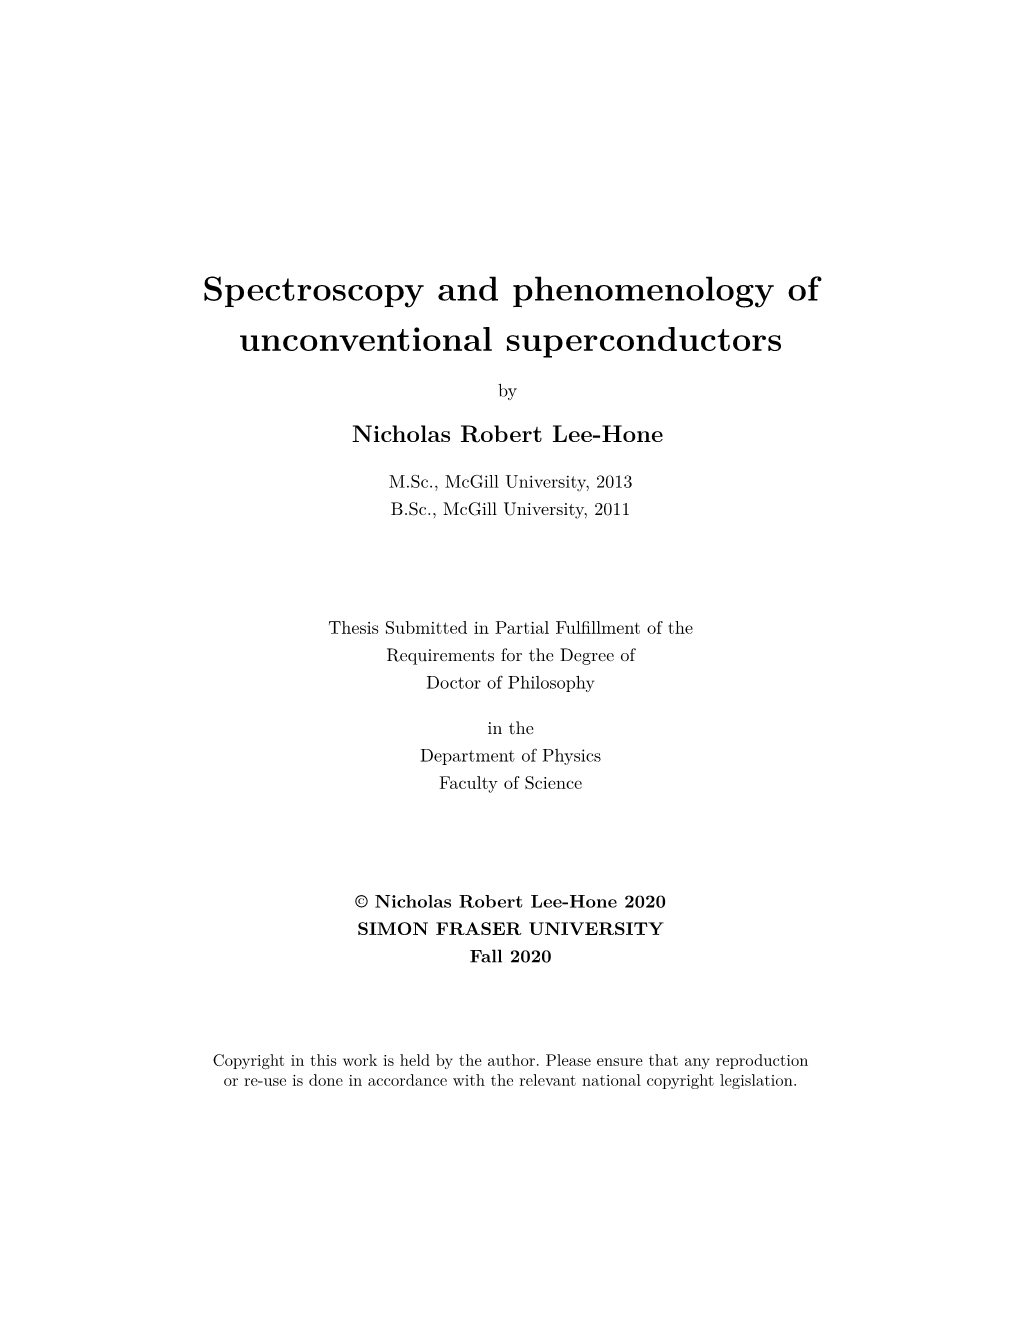 Spectroscopy and Phenomenology of Unconventional Superconductors